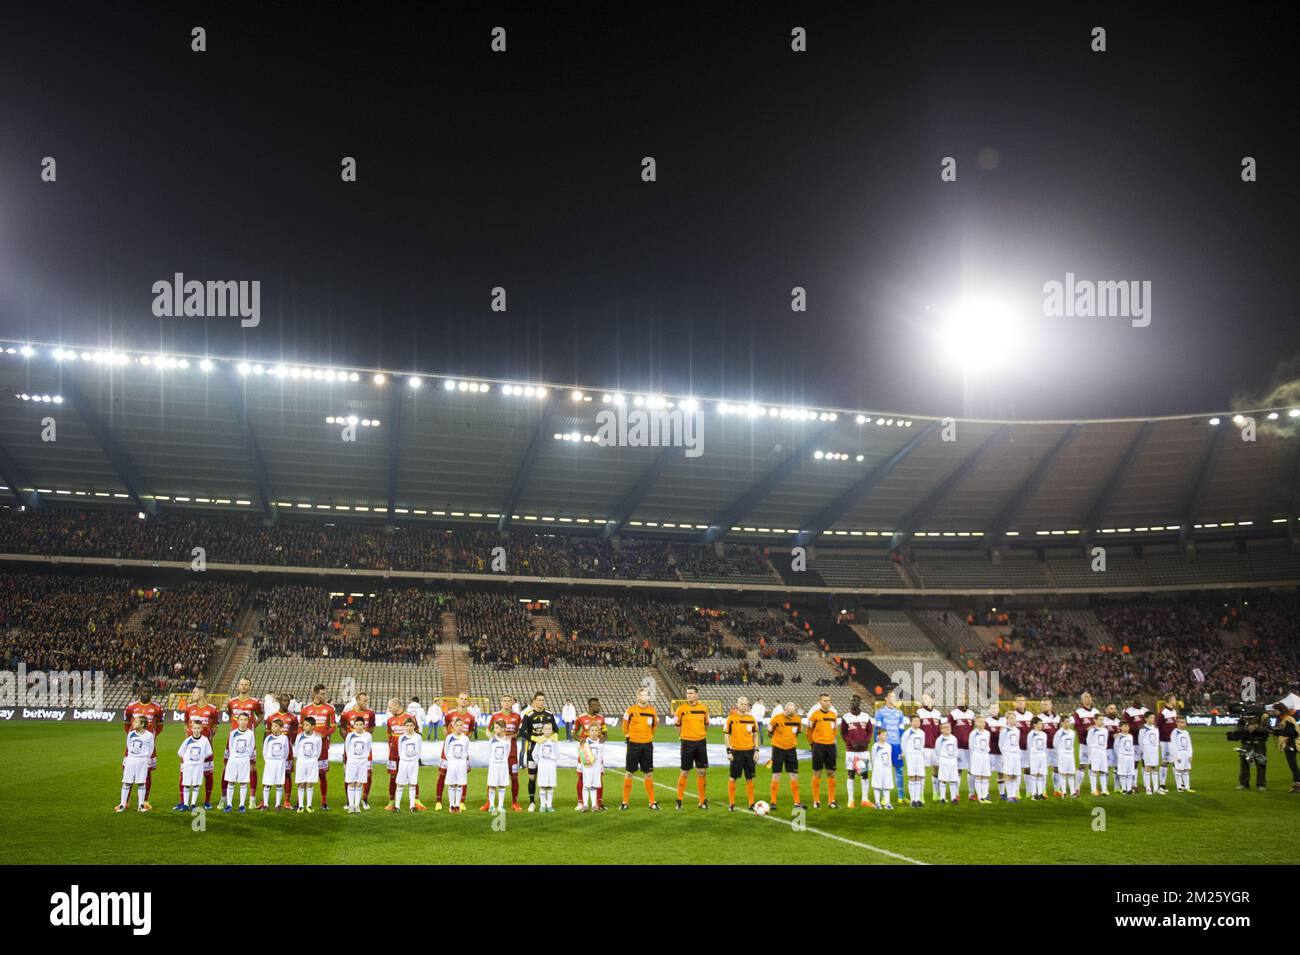 Oostende (L) and Zulte (R) teams at the start of Croky Cup soccer final between SV Zulte Waregem and KV Oostende, on Saturday 18 March 2017, in Brussels. BELGA PHOTO JASPER JACOBS Stock Photo